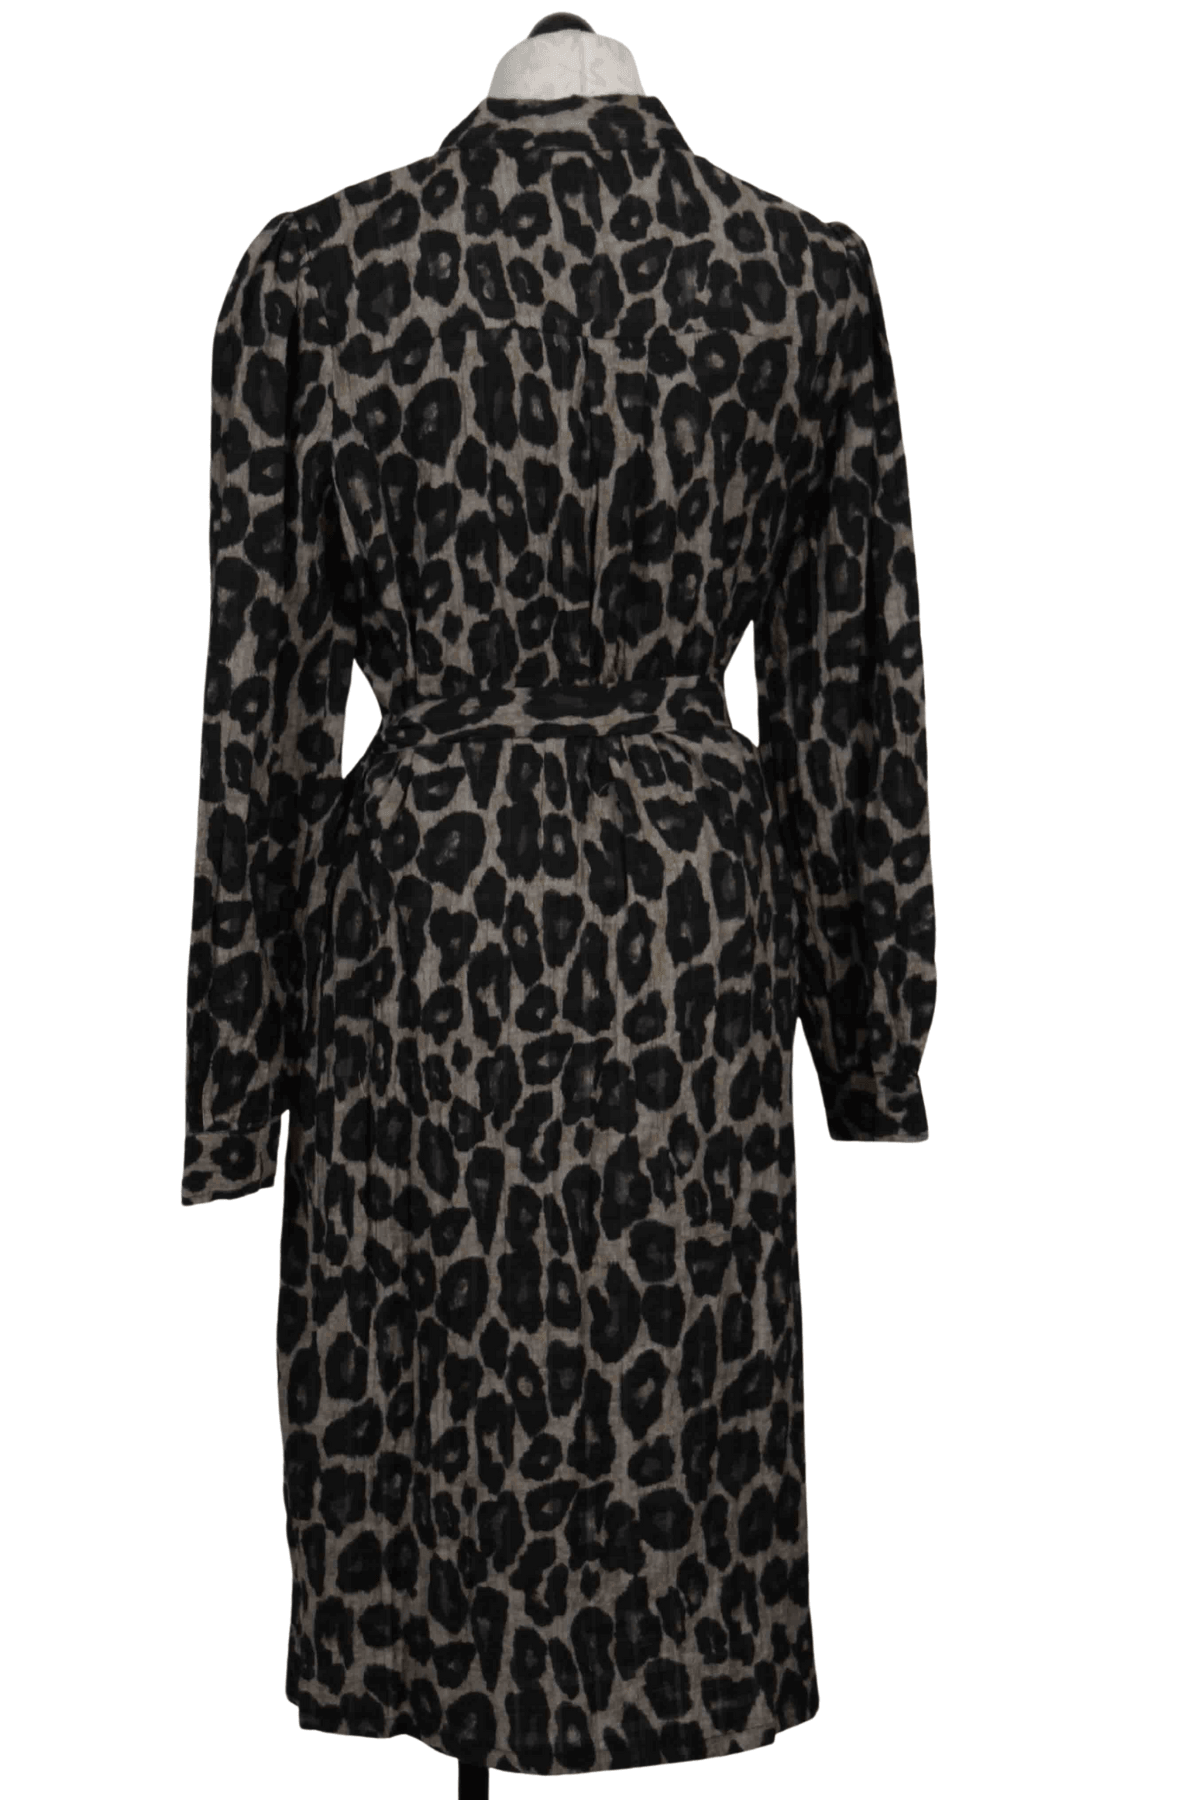 back view of Corina Leopard Shirt Dress by Yest